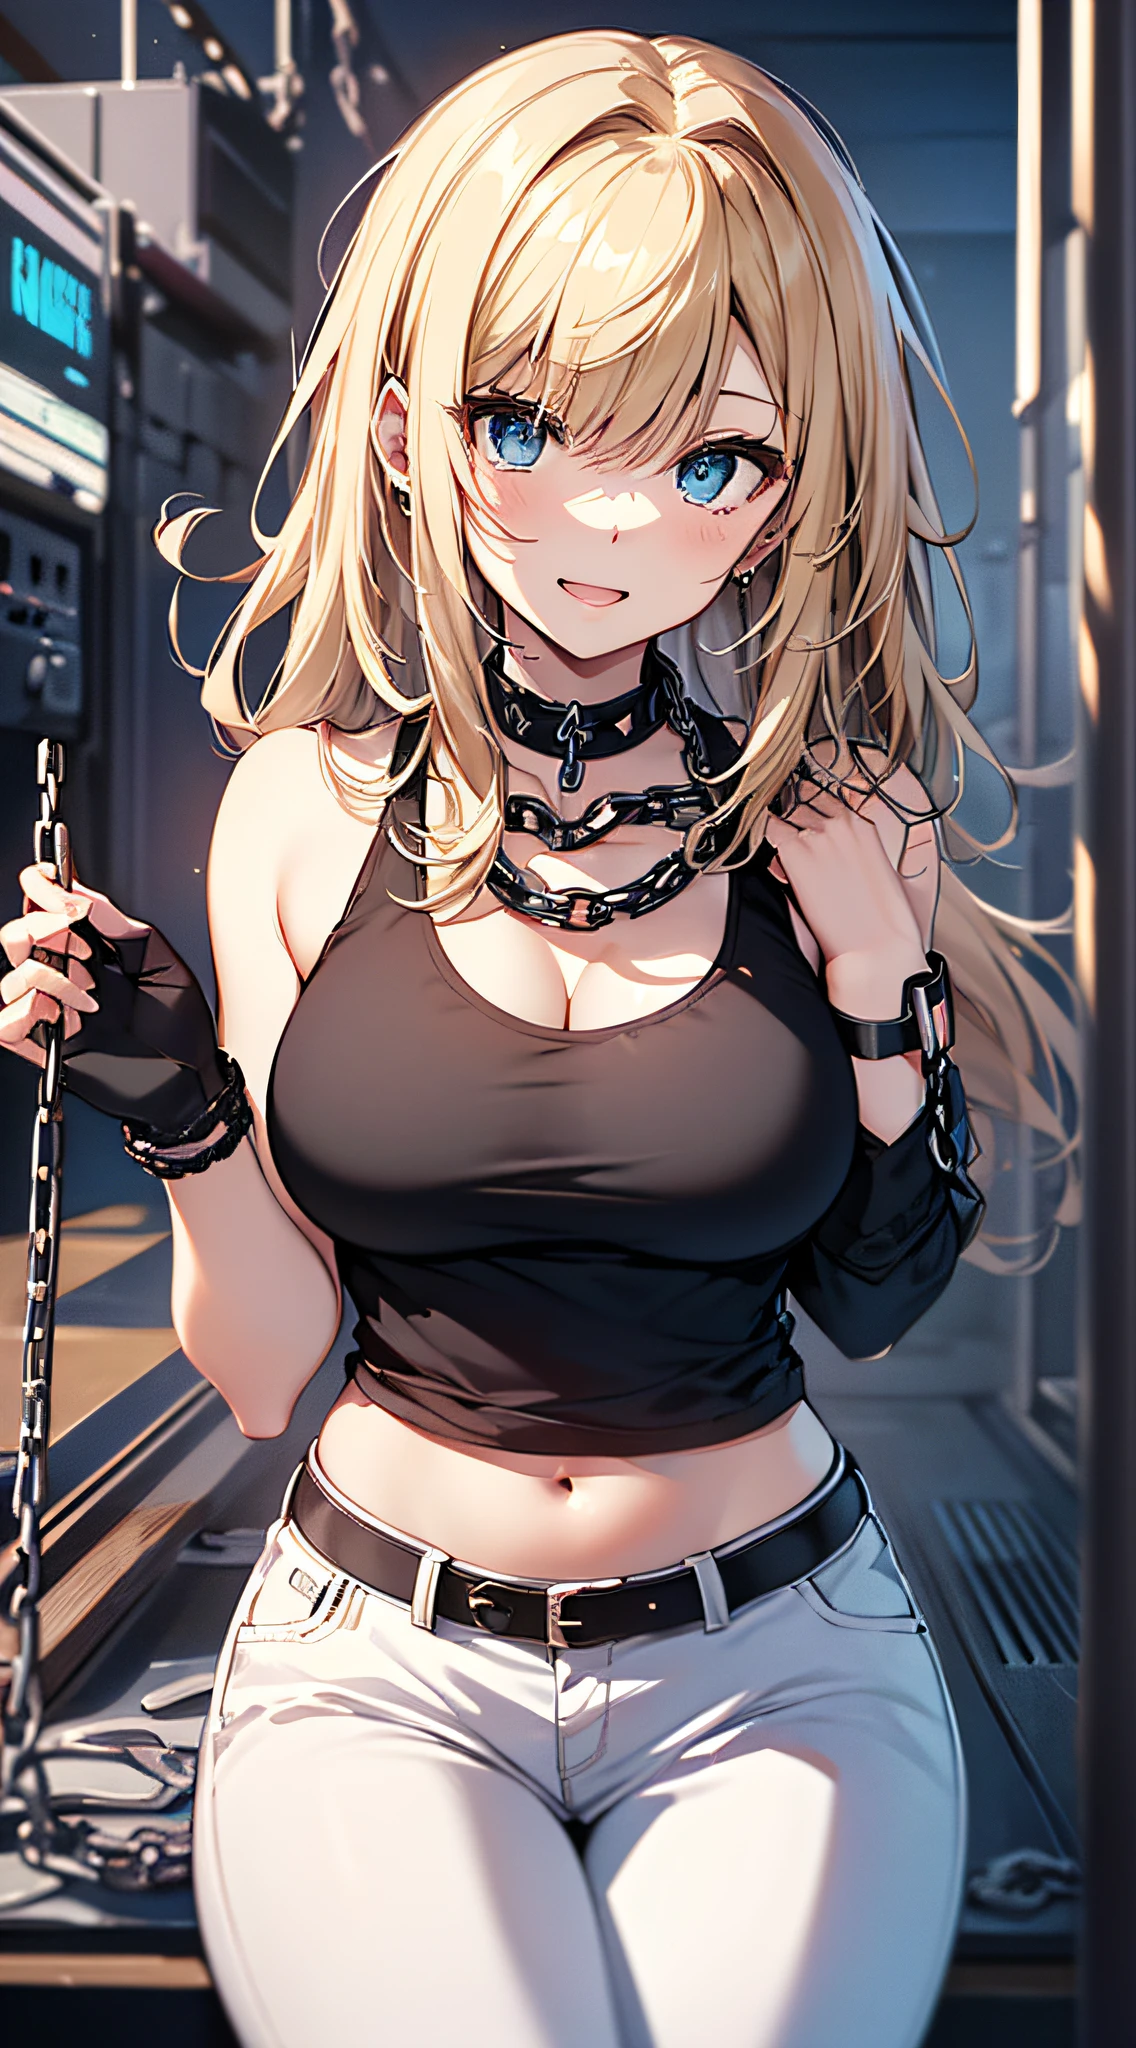 top-quality、Top image quality、​masterpiece、girl with((18year old、右肩に♡のタトゥー、Black Navel Tank Top、White pants、Best Bust、Bust 85、a blond、poneyTail、blue eyes、open chest wide、Happiness、Chain Accessories、Black wristband on wrist、all-fours,A slender)）hiquality、visualart、Background with((Blue Room))、masutepiece